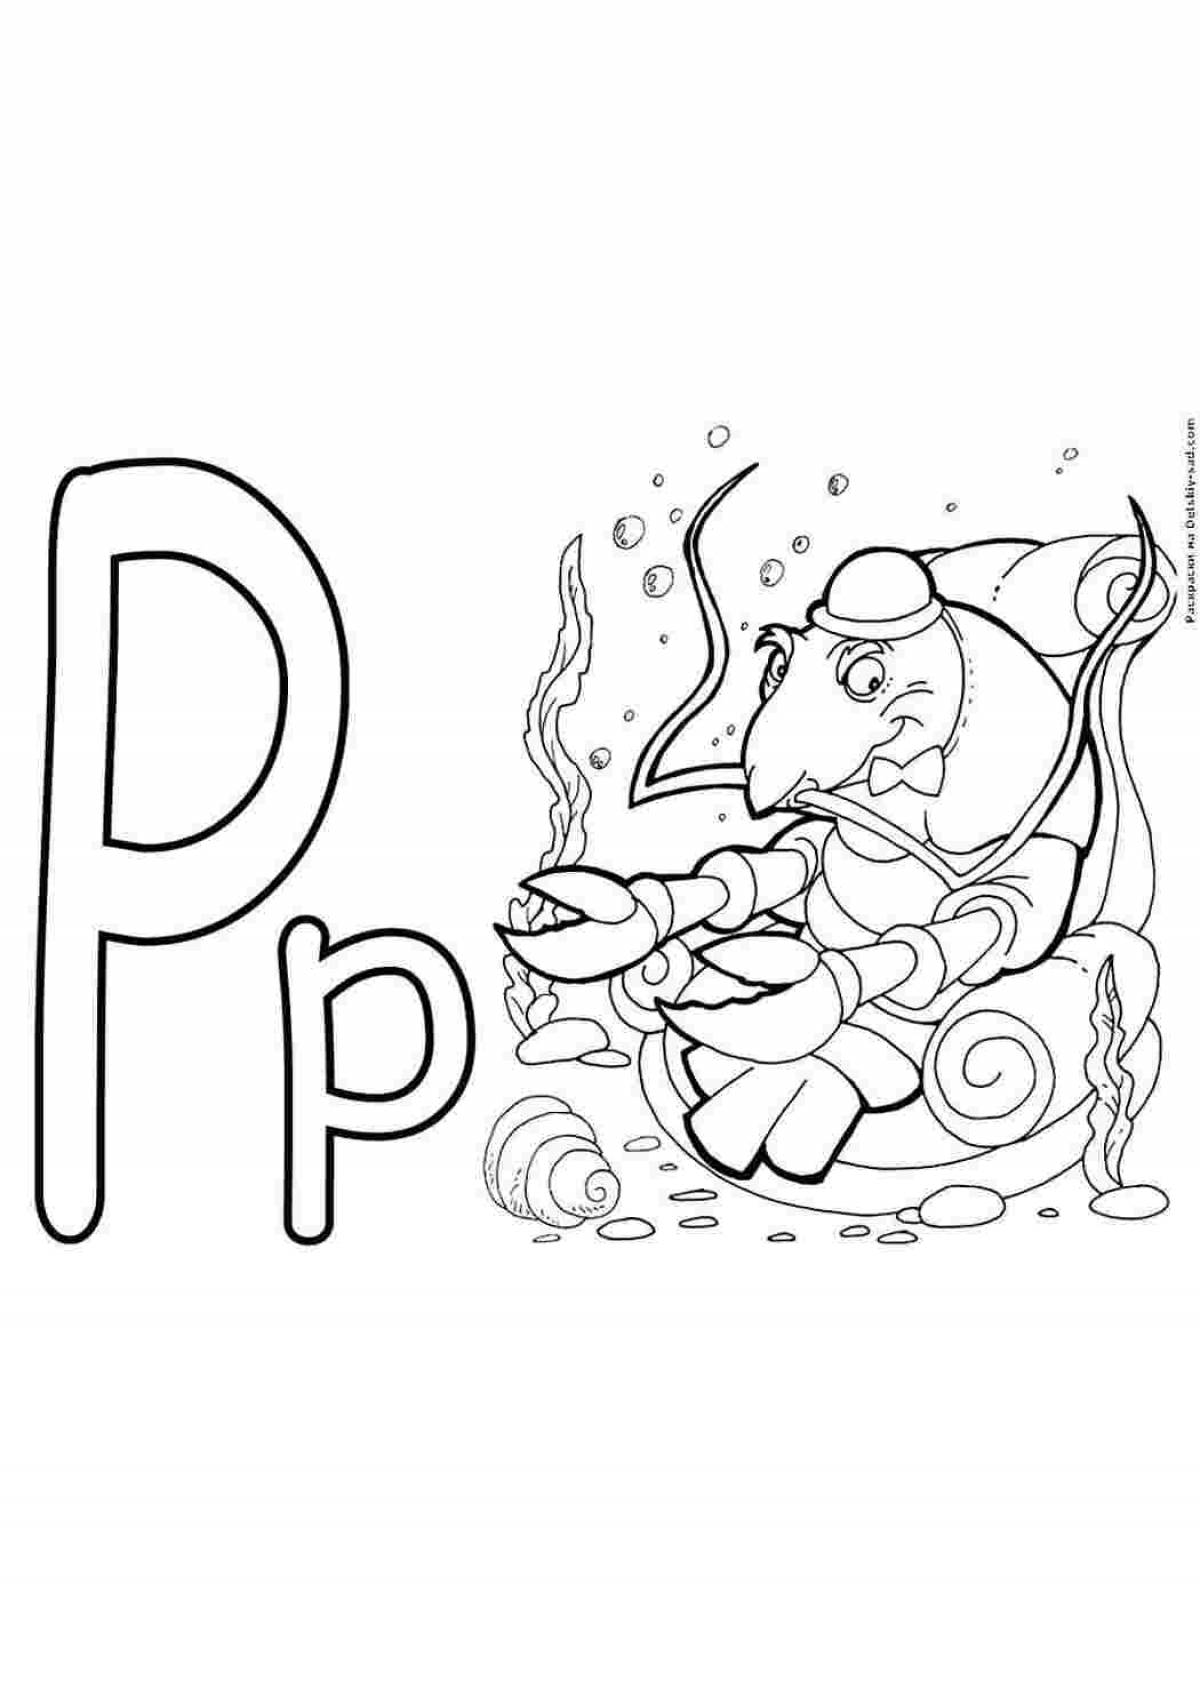 Coloring pages letter r for preschoolers